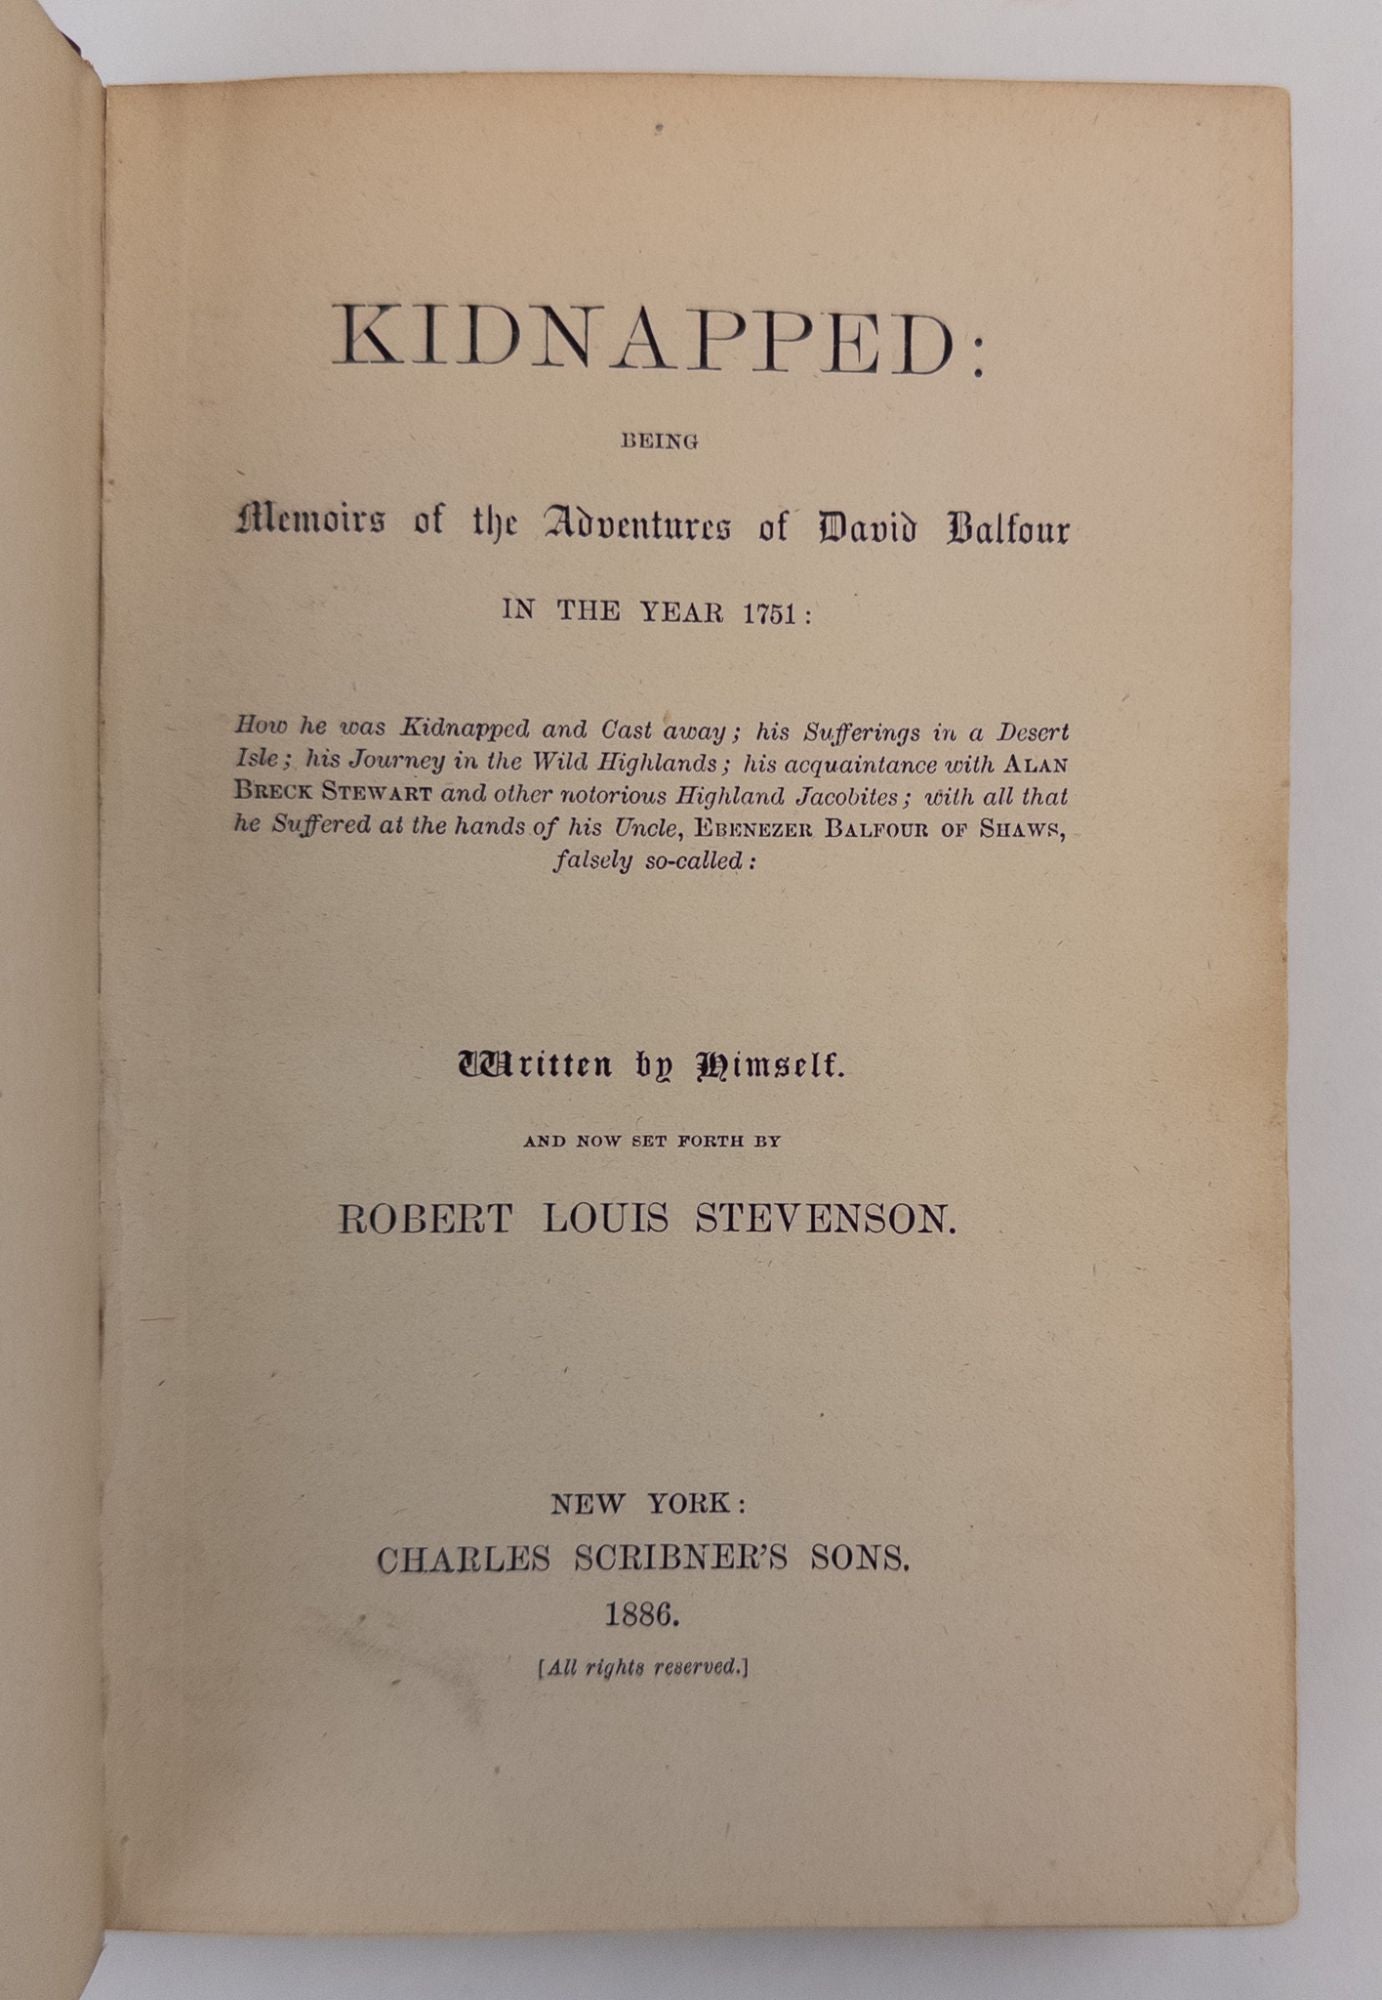 Product Image for KIDNAPPED: BEING MEMOIRS OF THE ADVENTURES OF DAVID BALFOUR